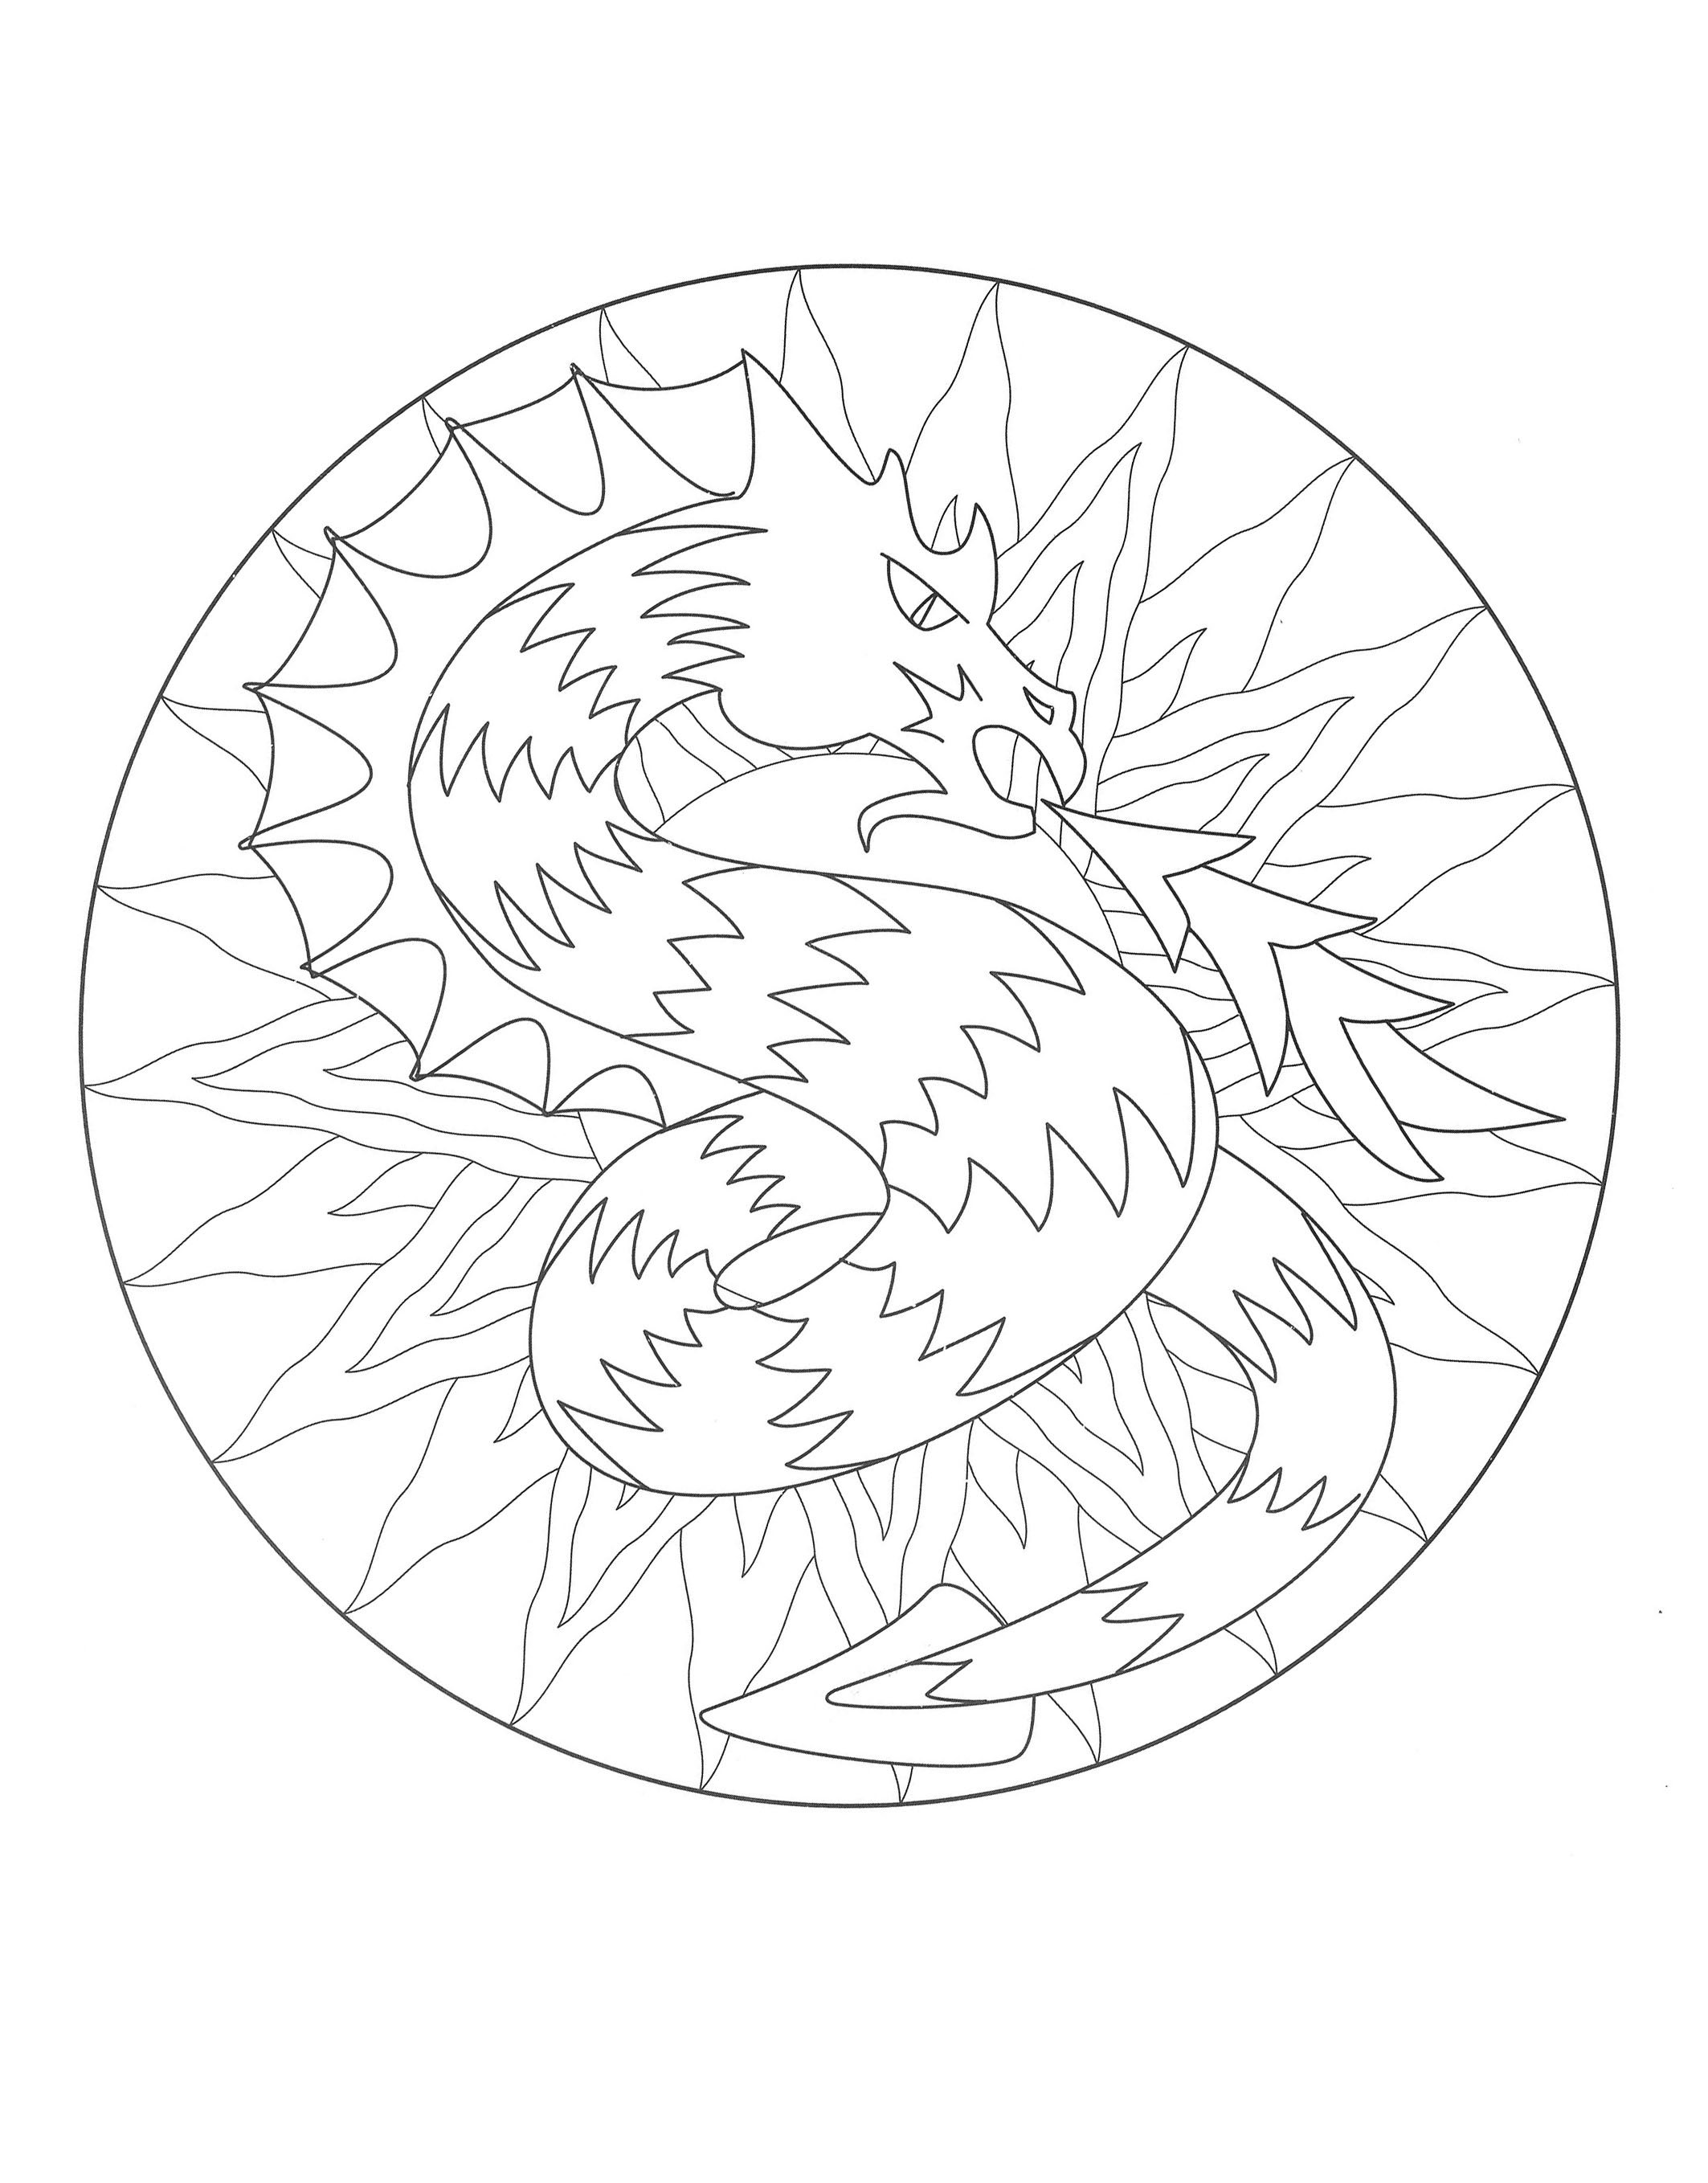 Free Dragon Mandala Coloring page. Many small patterns and little details for a Mandala coloring page of good quality. Still your mind : this step is essential to get the most out of coloring to reduce your stress